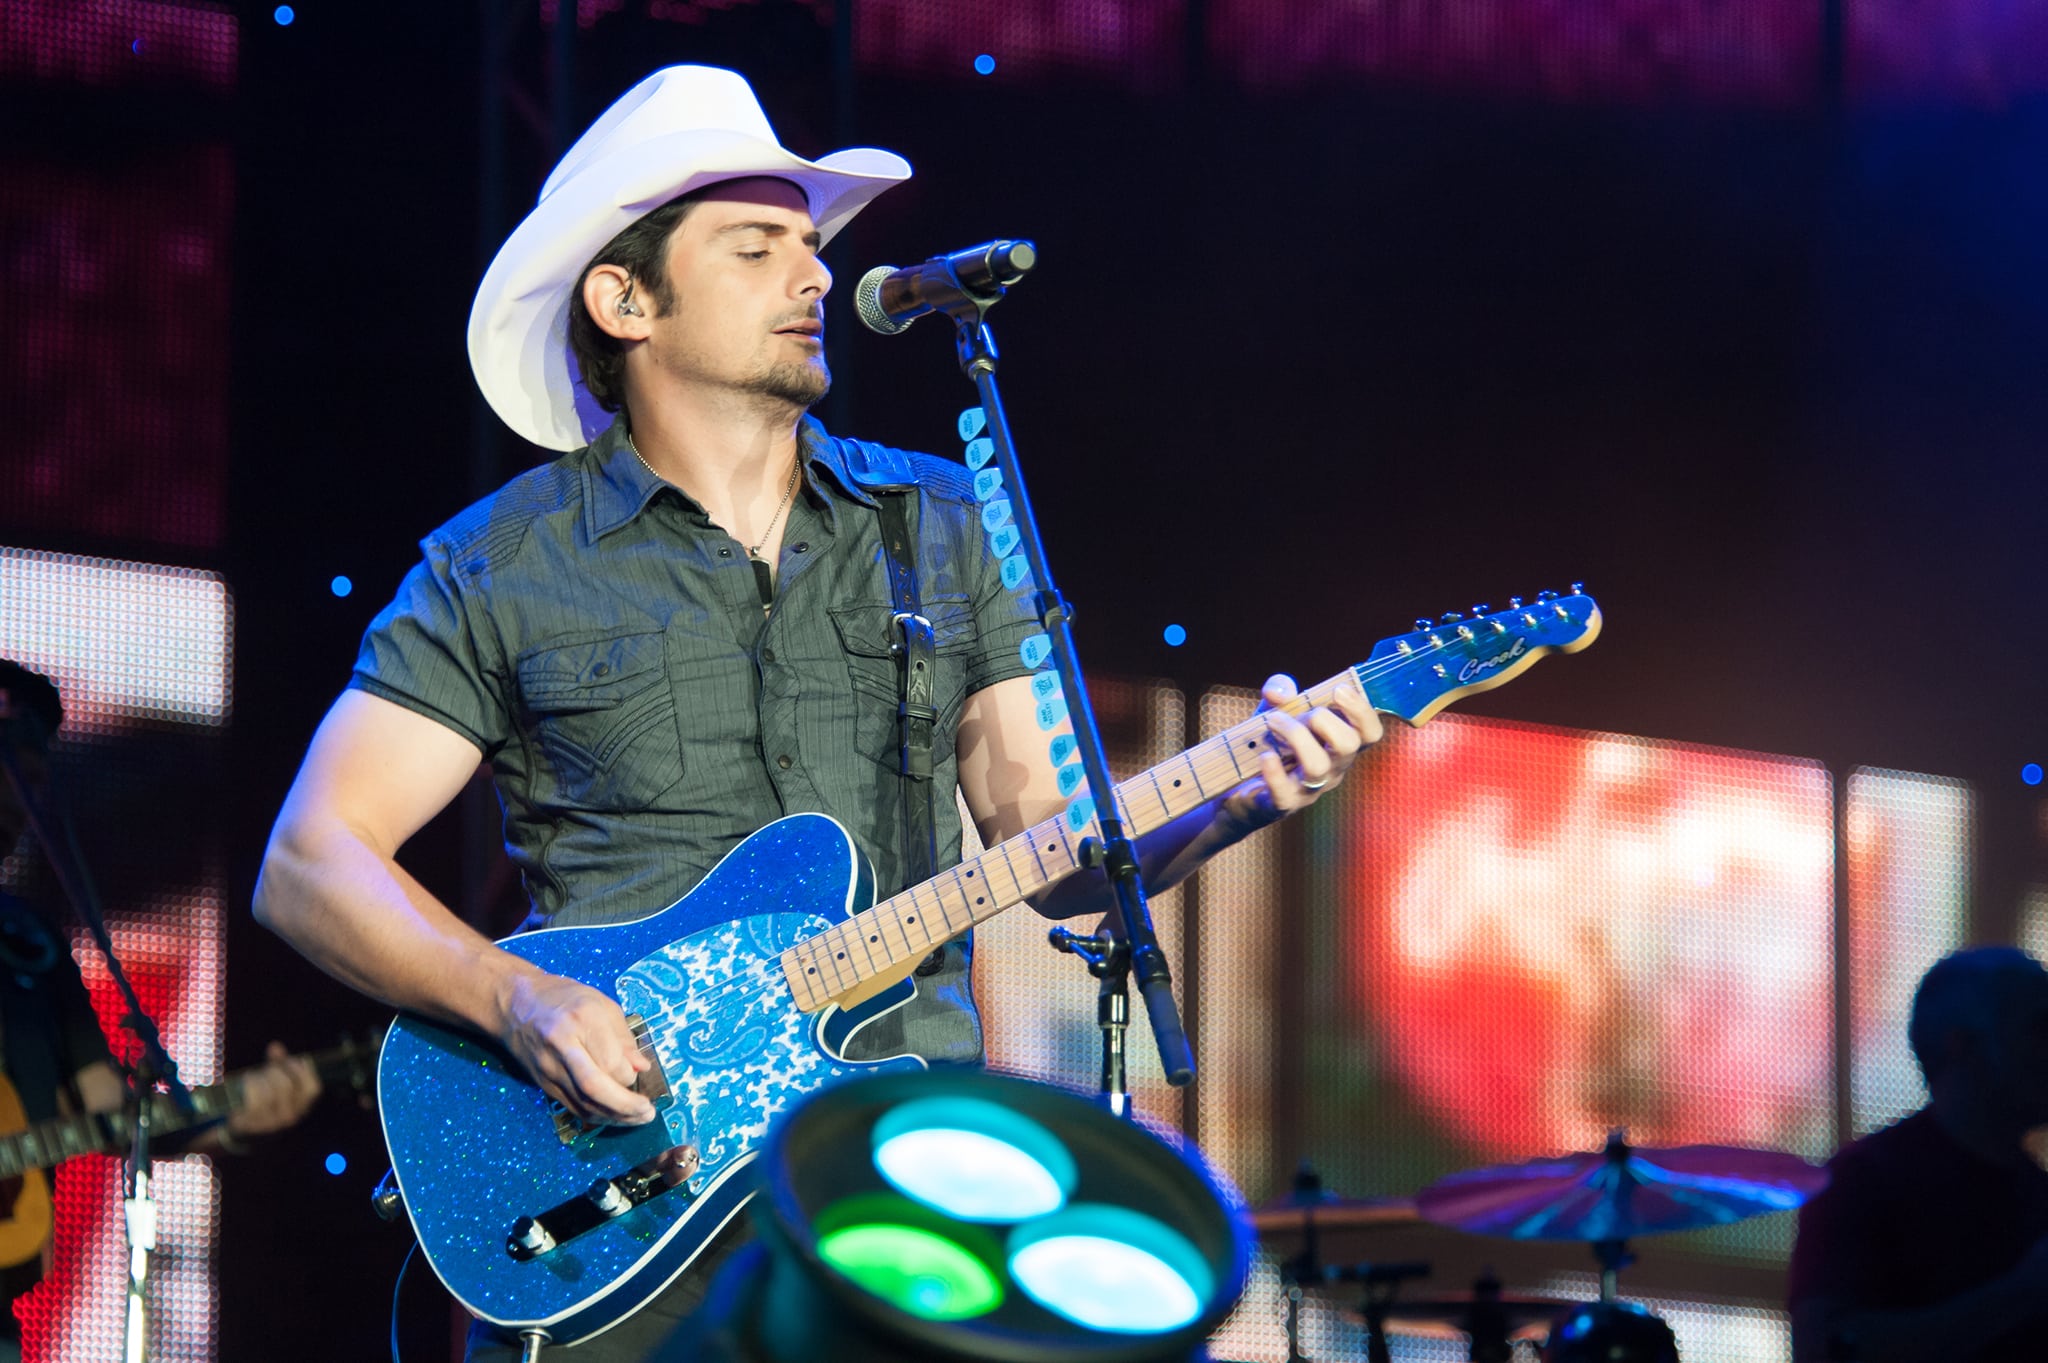 Brad Paisley has earned three Grammy Awards, 14 Academy of Country Music Awards, 14 Country Music Association Awards, and two American Music Awards